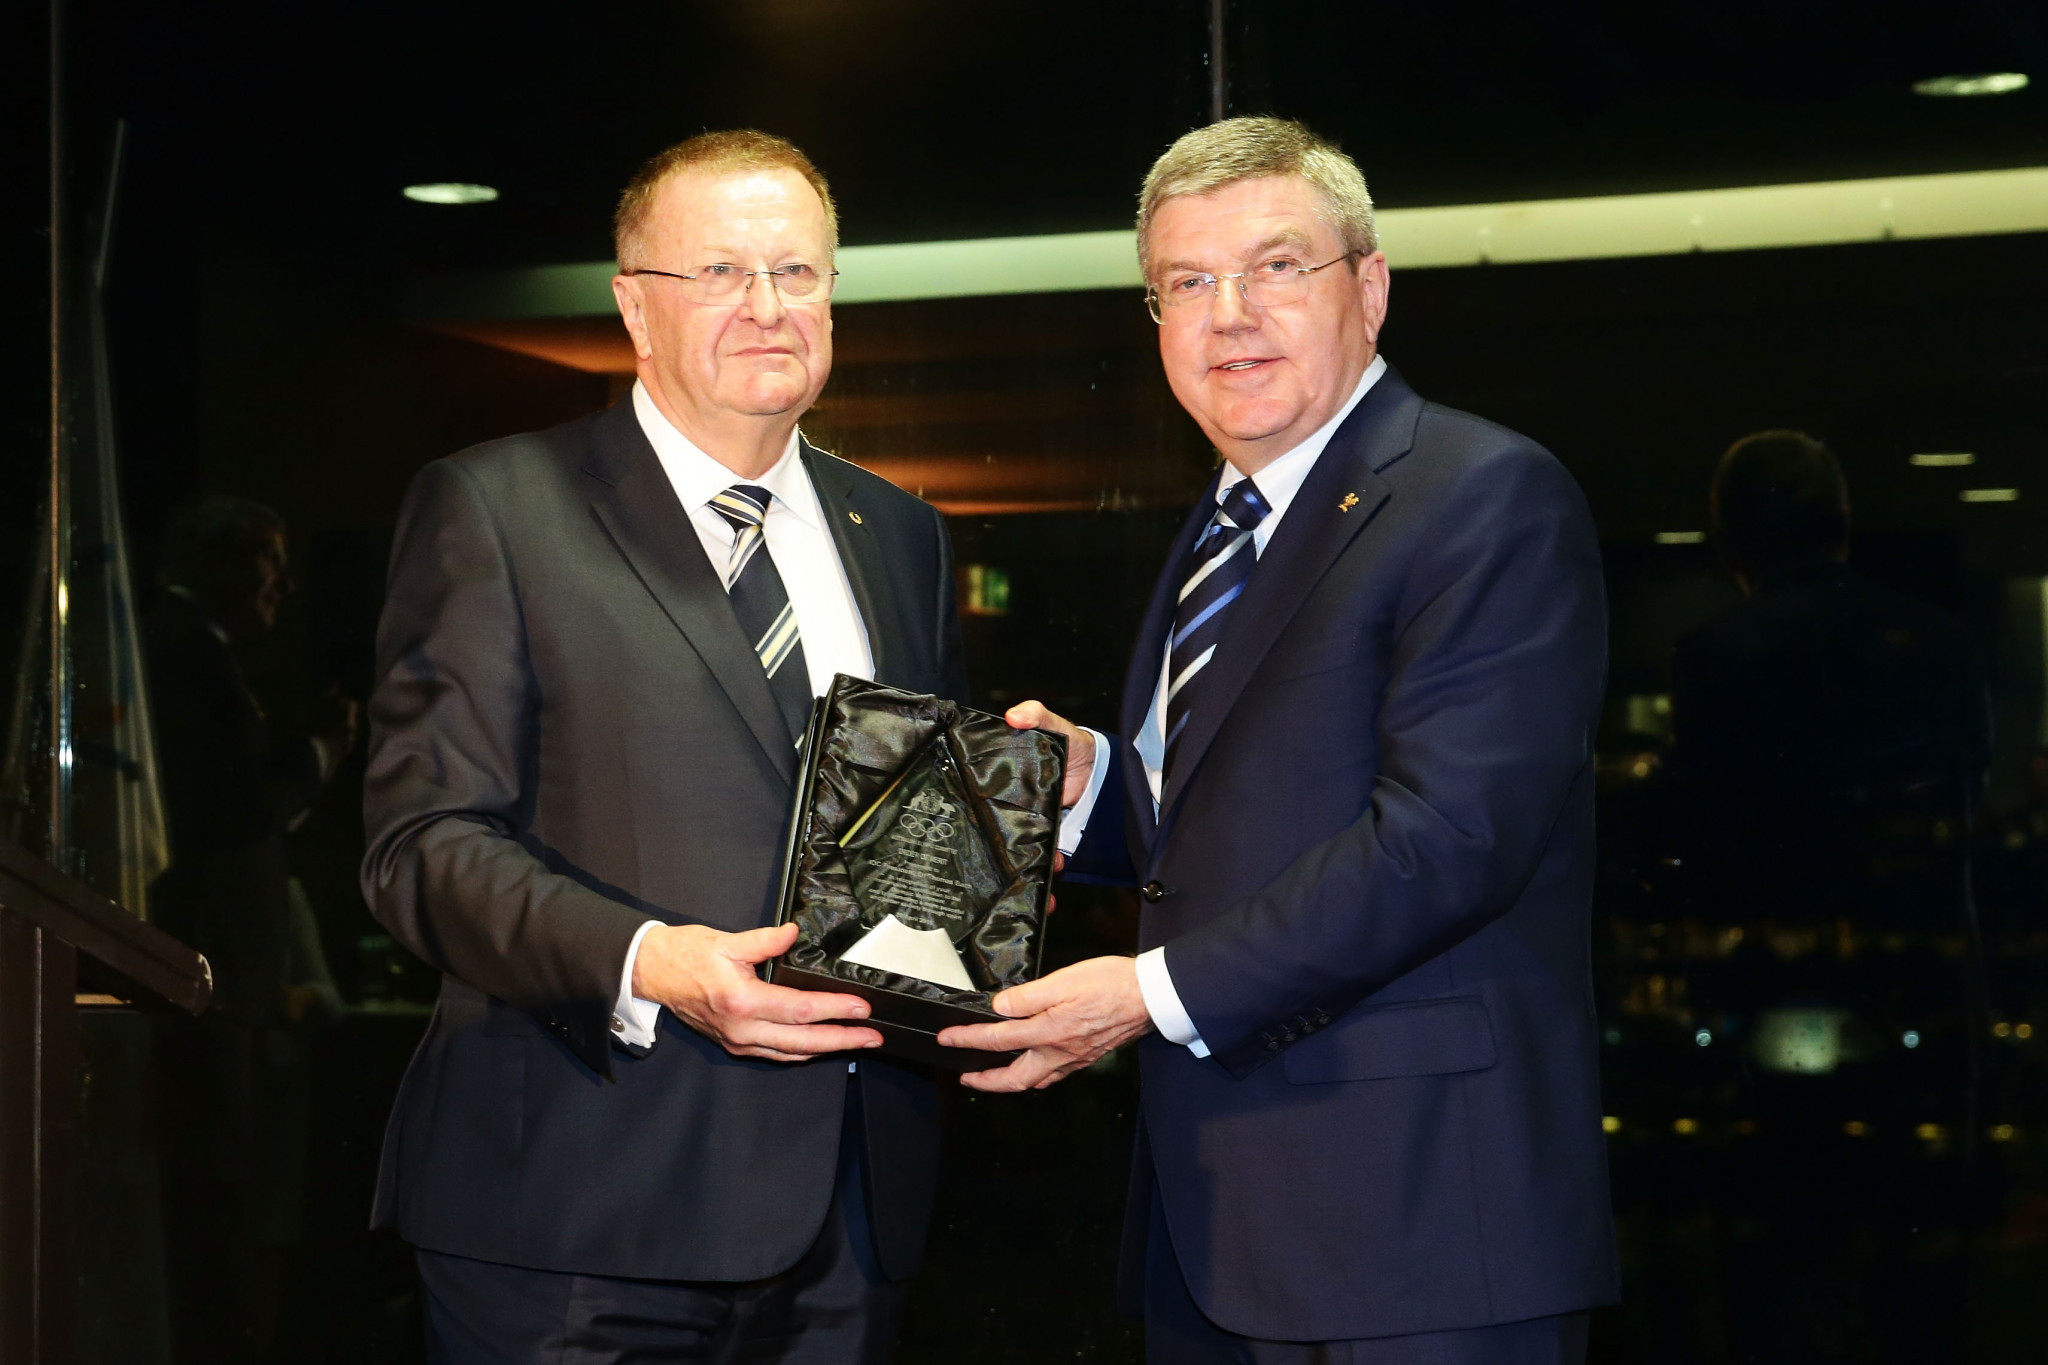 Former IOC vice-president John Coates will chair the new working group ©Getty Images